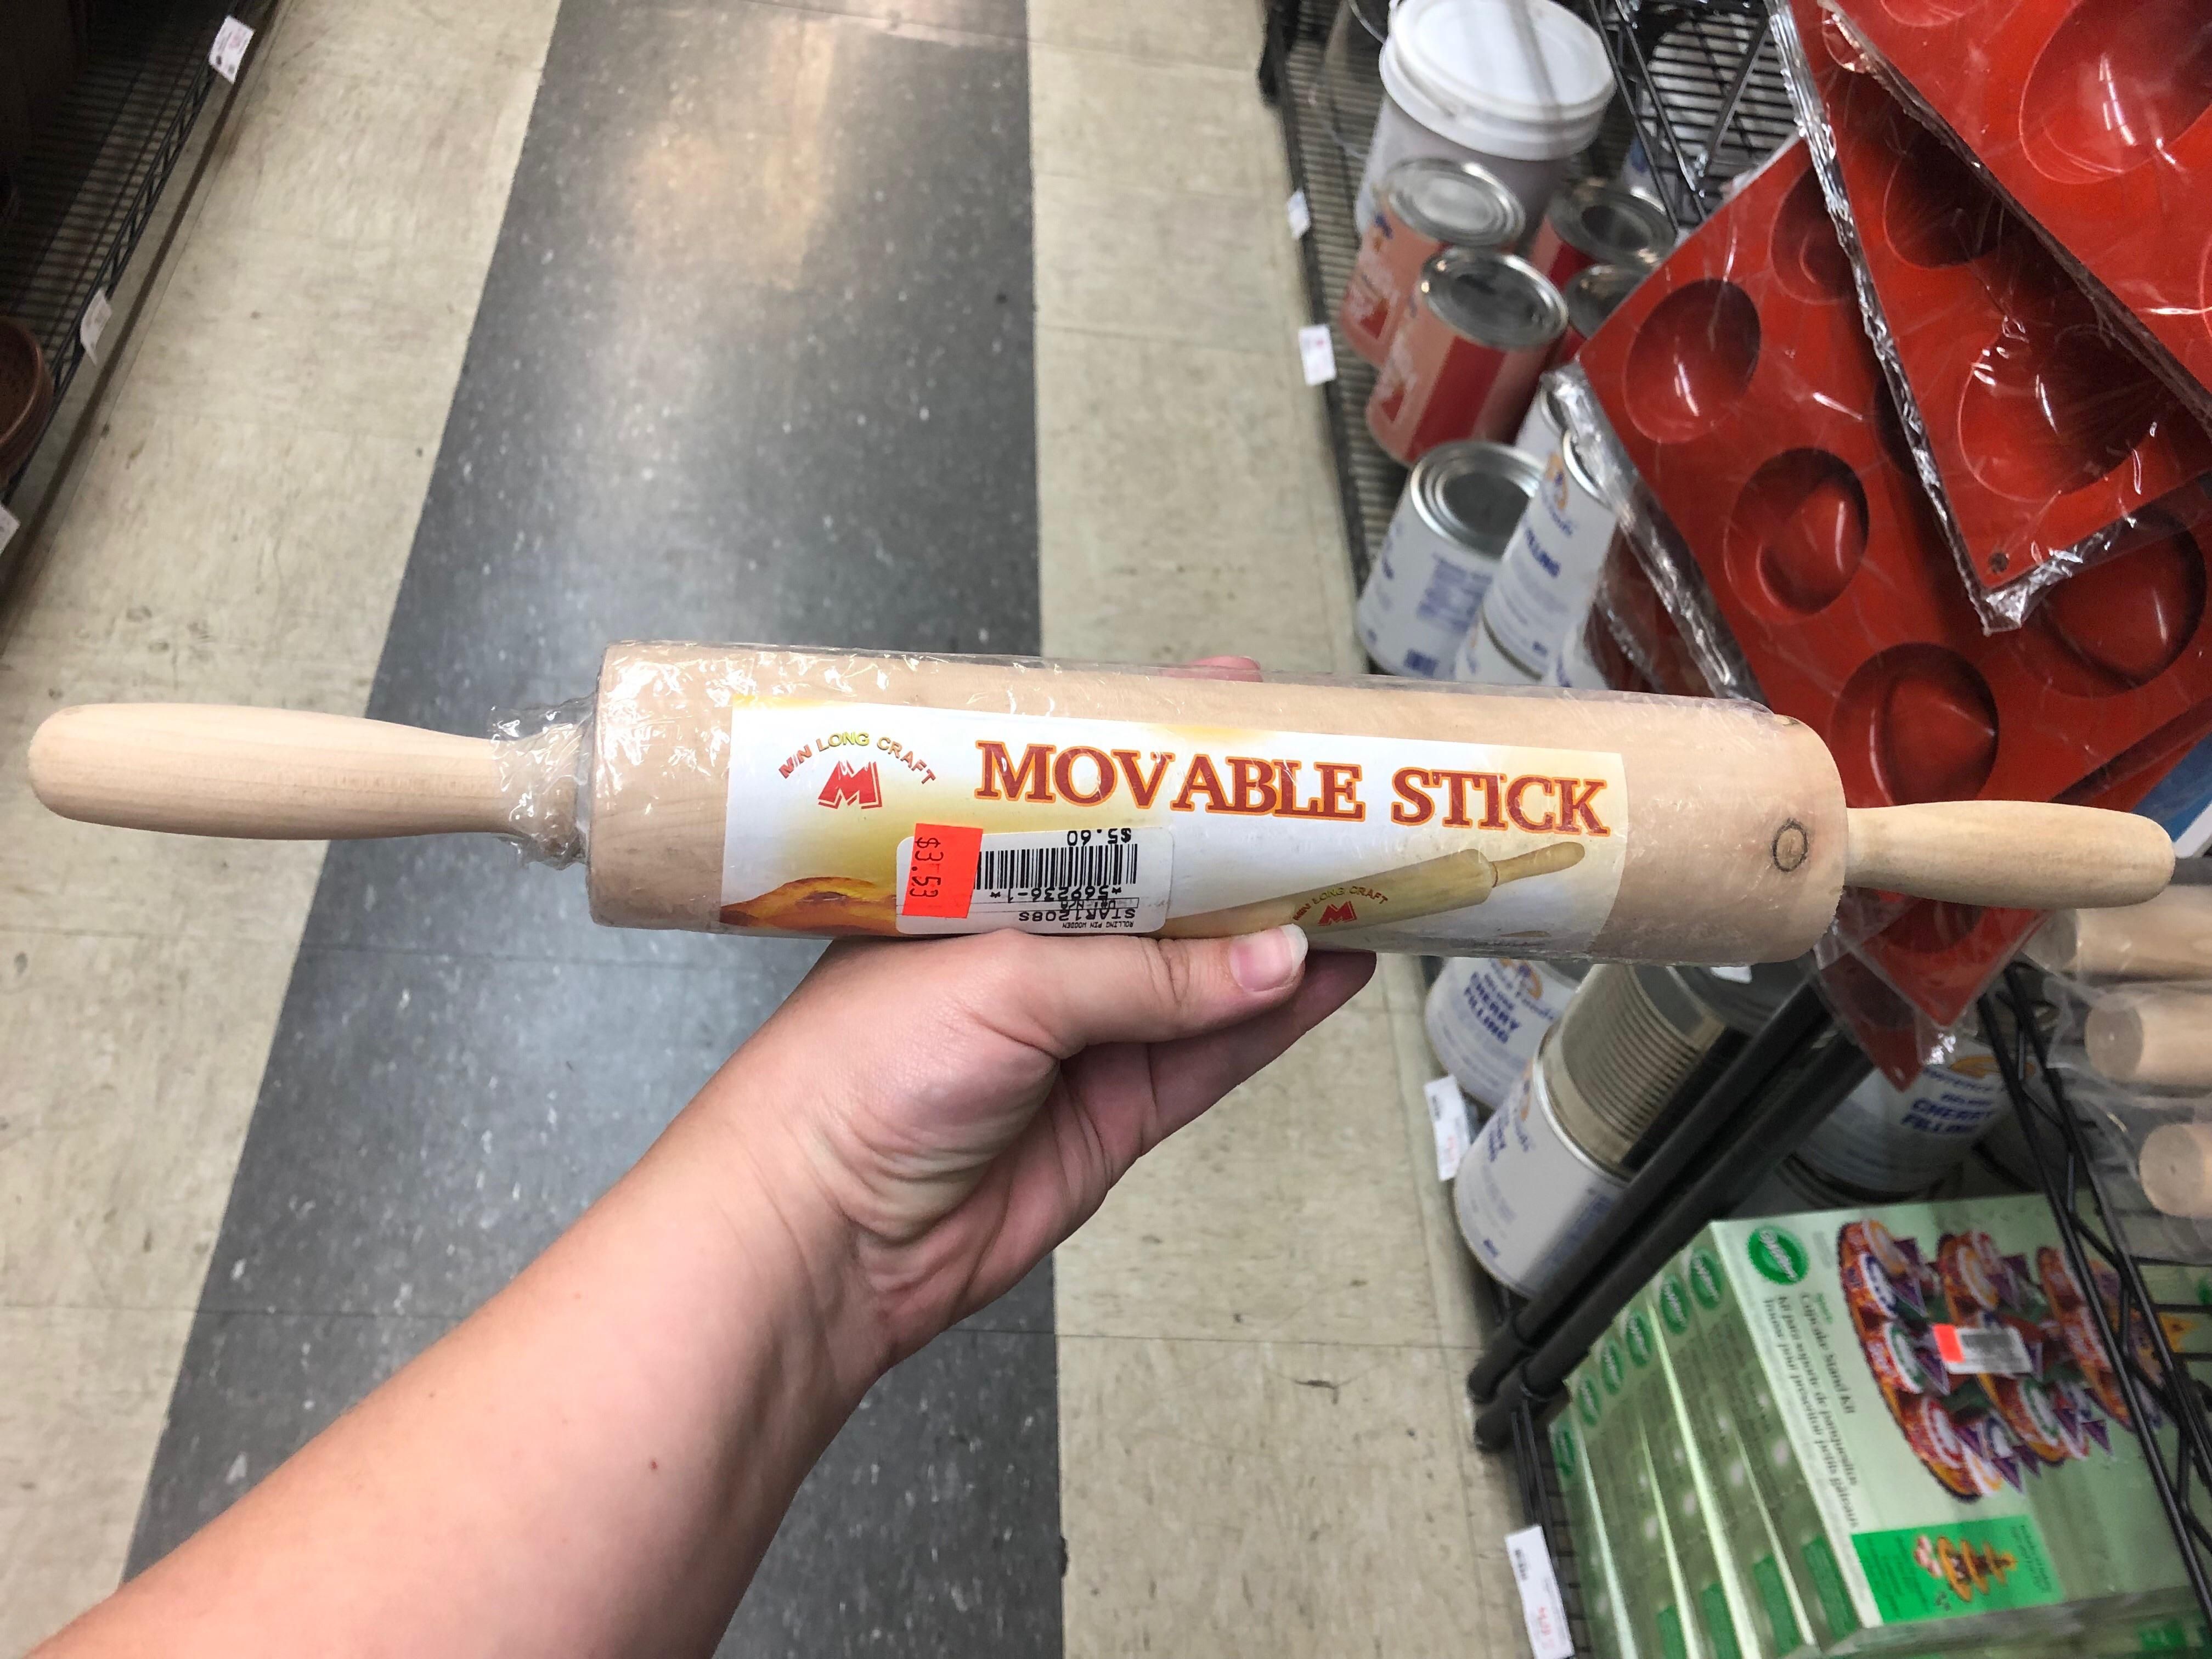 If only there were a name for this rolling piece of wood